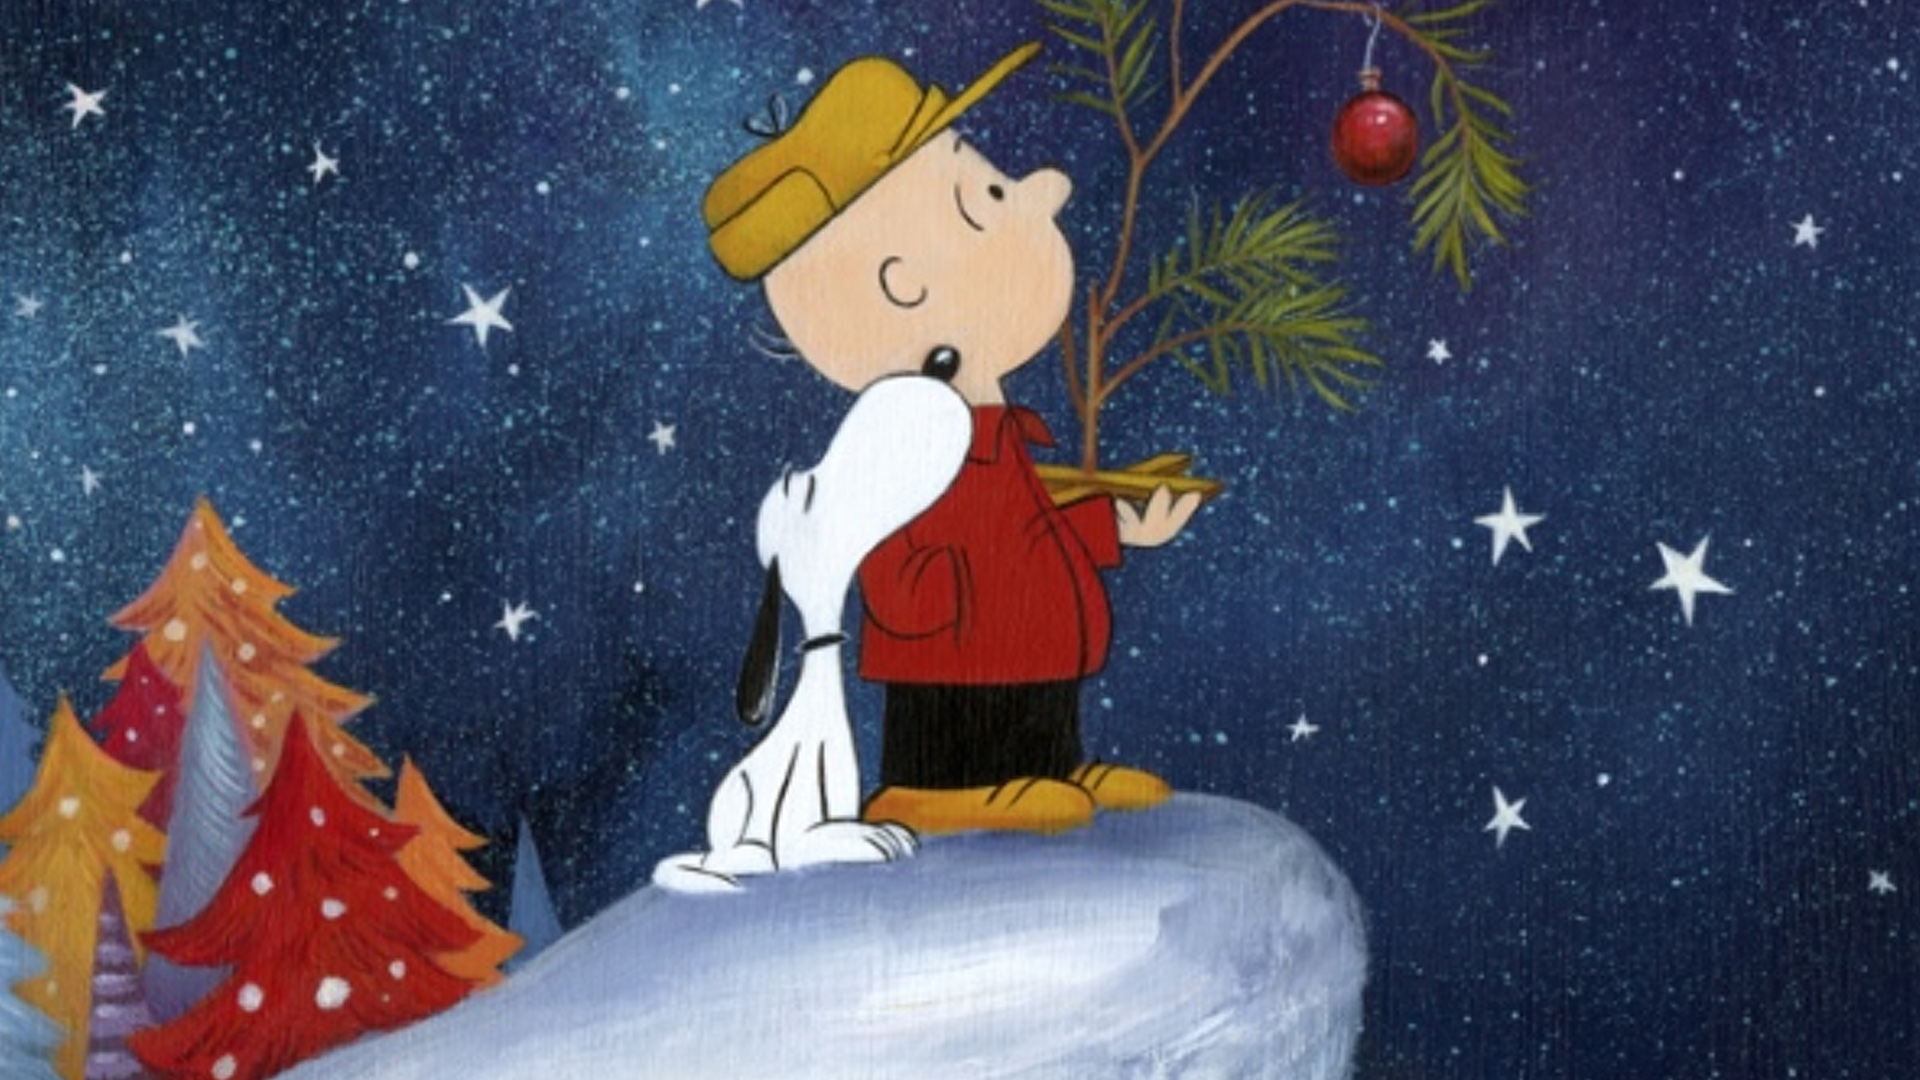 A CHARLIE BROWN CHRISTMAS Art Collection From Dark Hall Mansion.